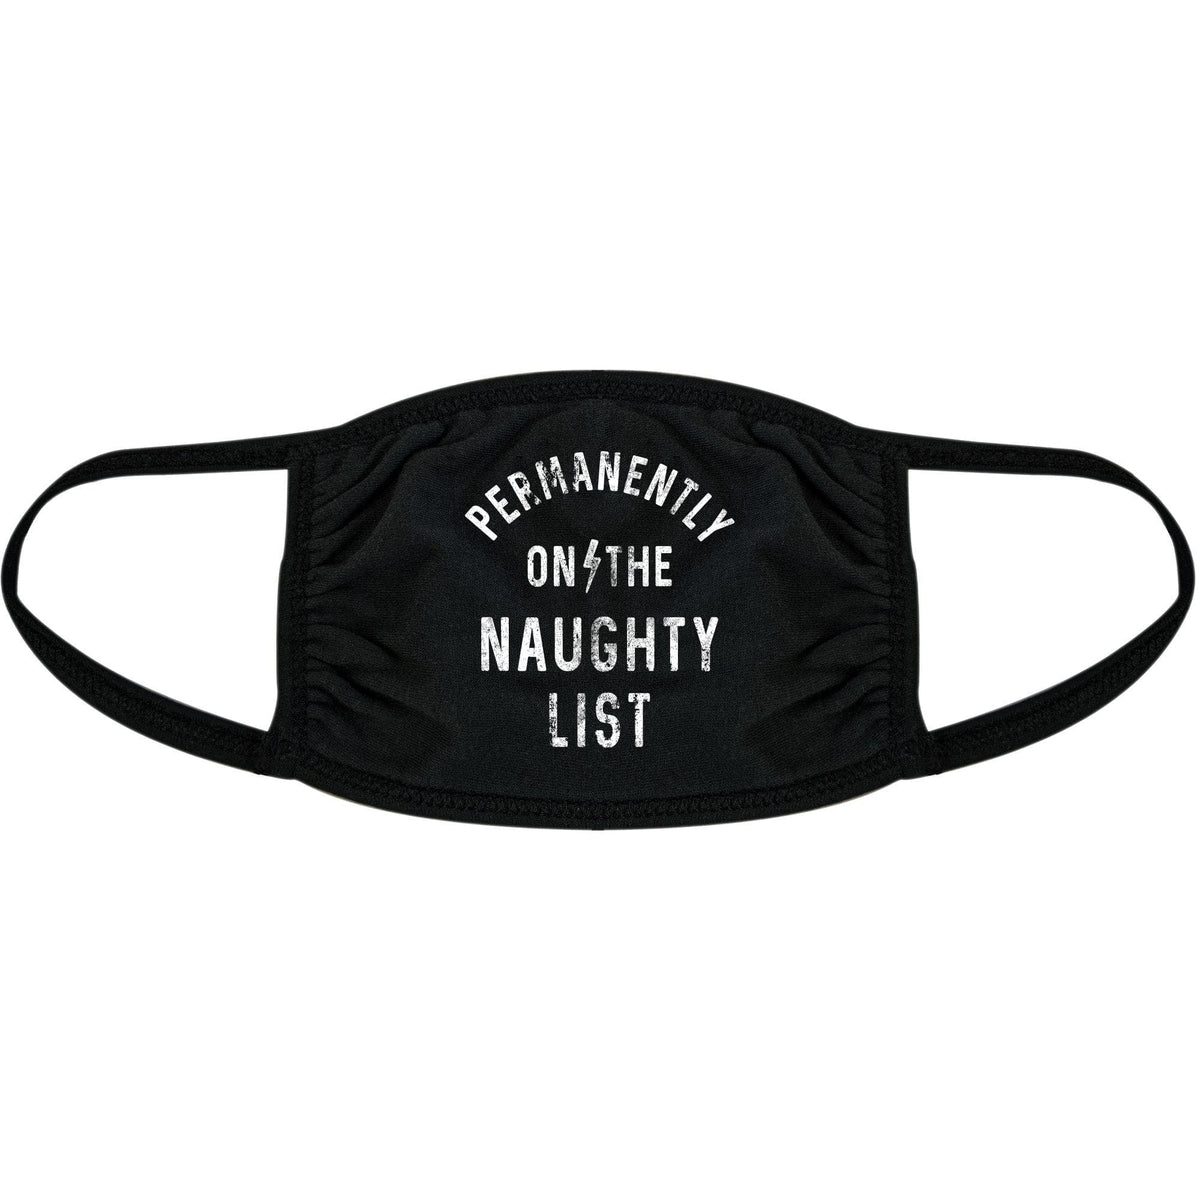 Permanently On The Naughty List Face Mask Mask - Crazy Dog T-Shirts